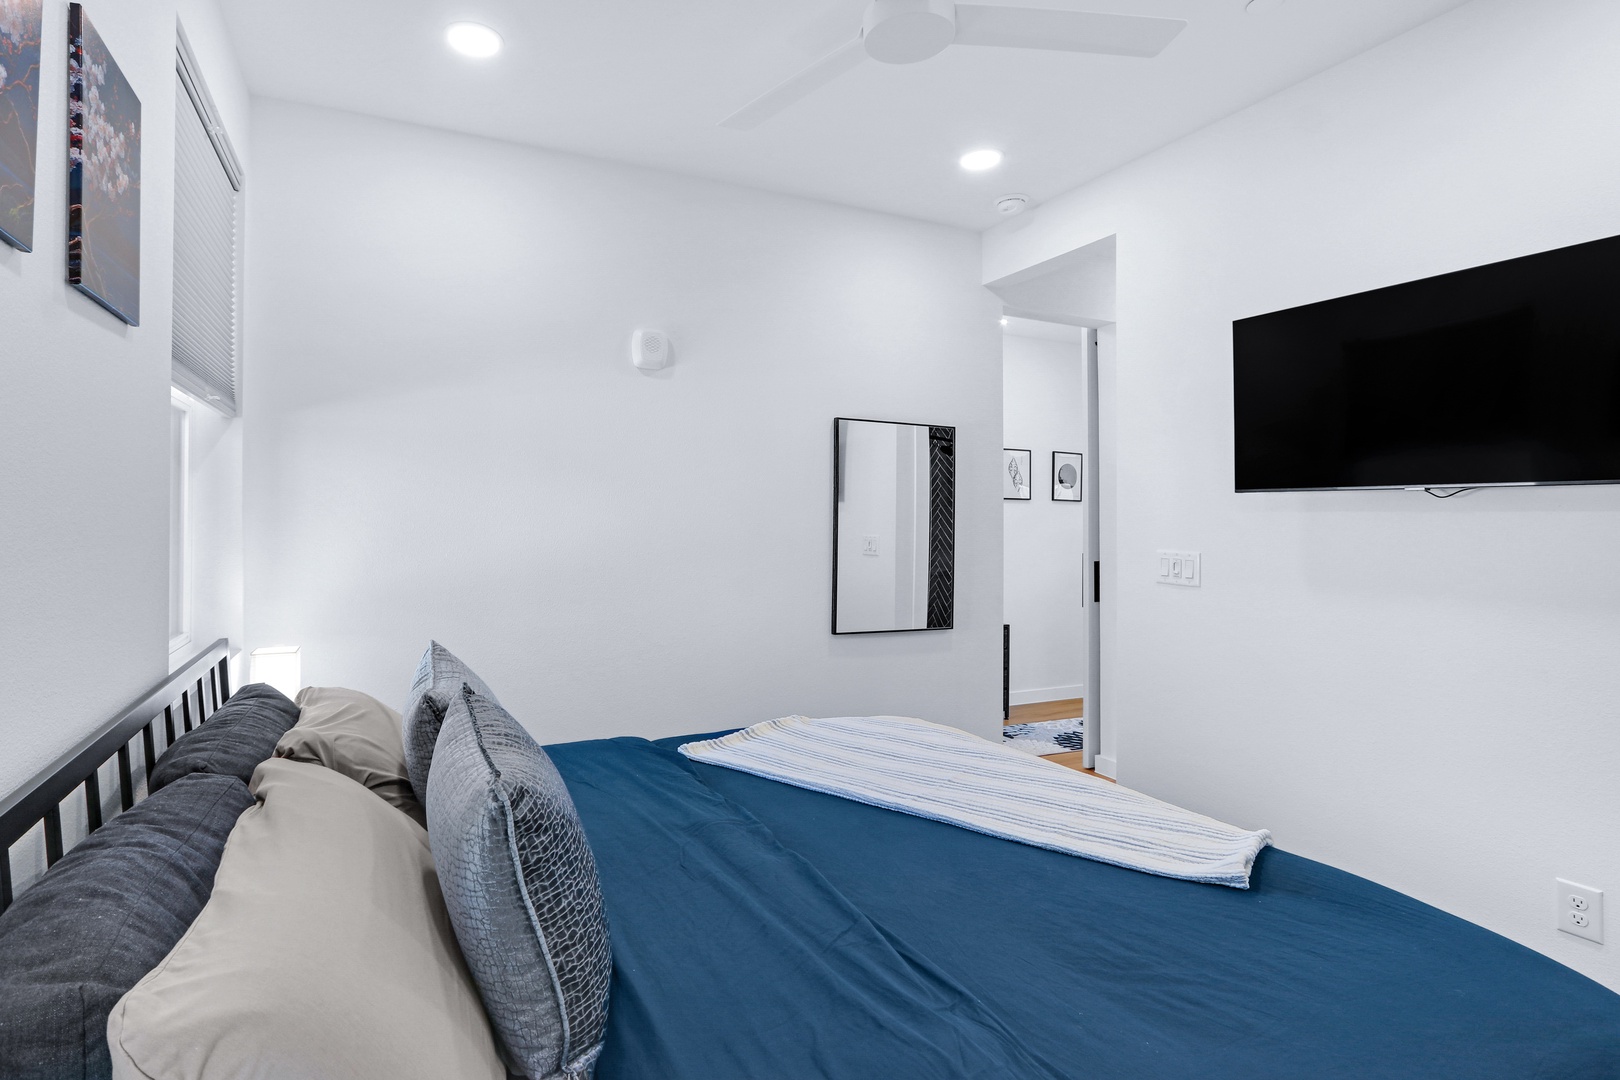 The king bedroom retreat includes a private ensuite & mounted Smart TV